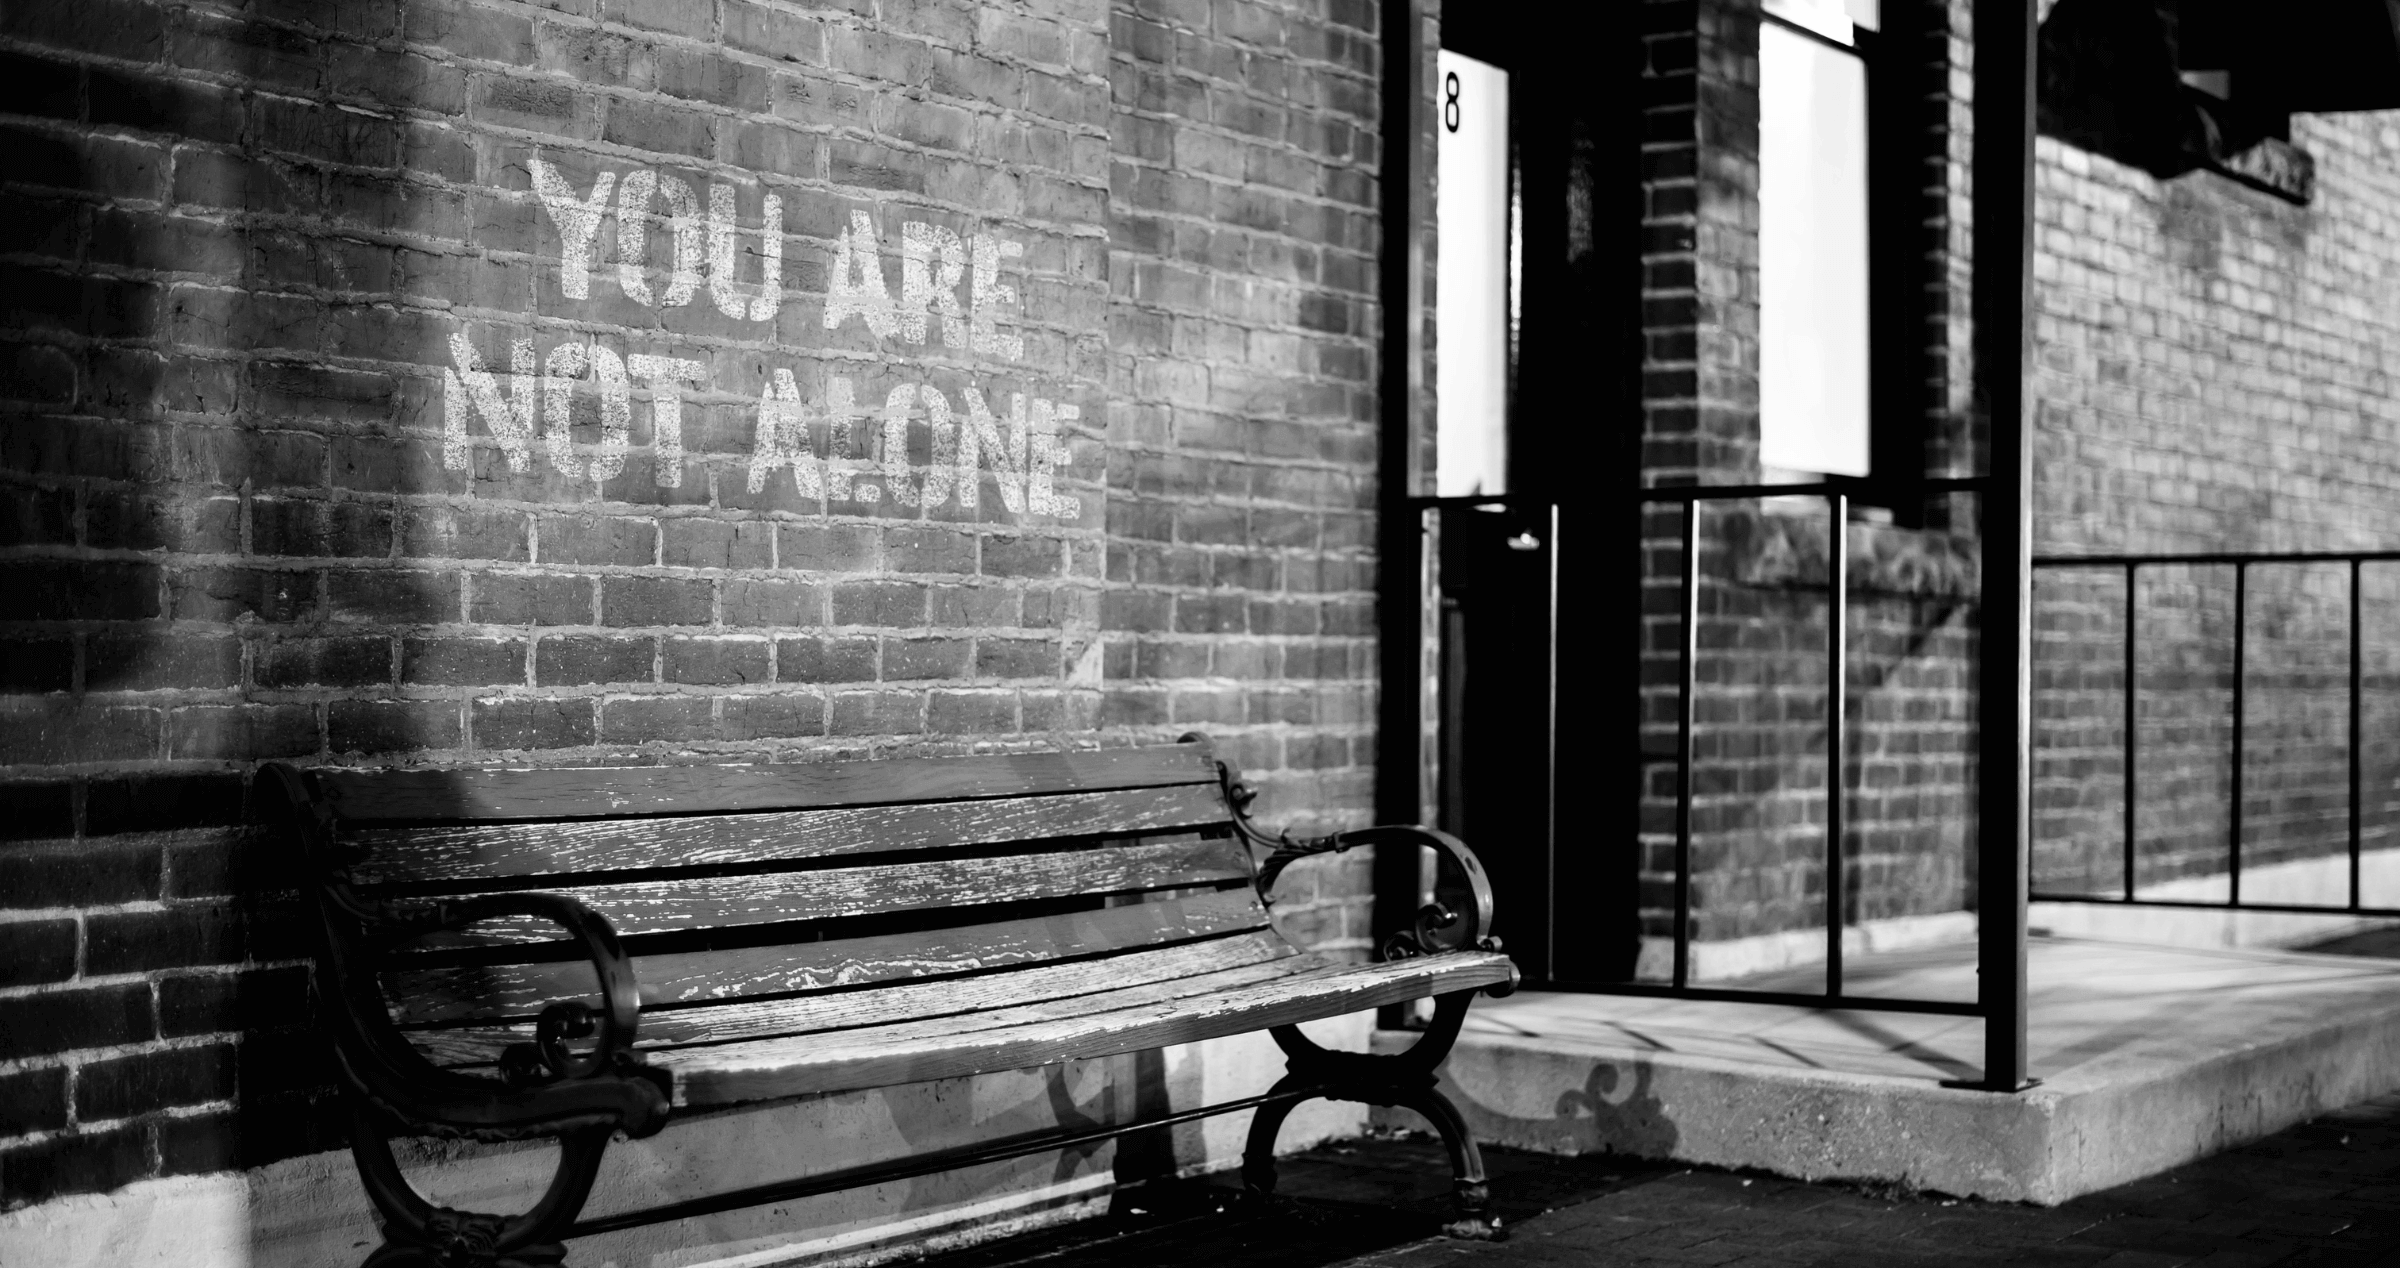 The words 'You Are Not Alone' painted in large capital letters on a brick wall